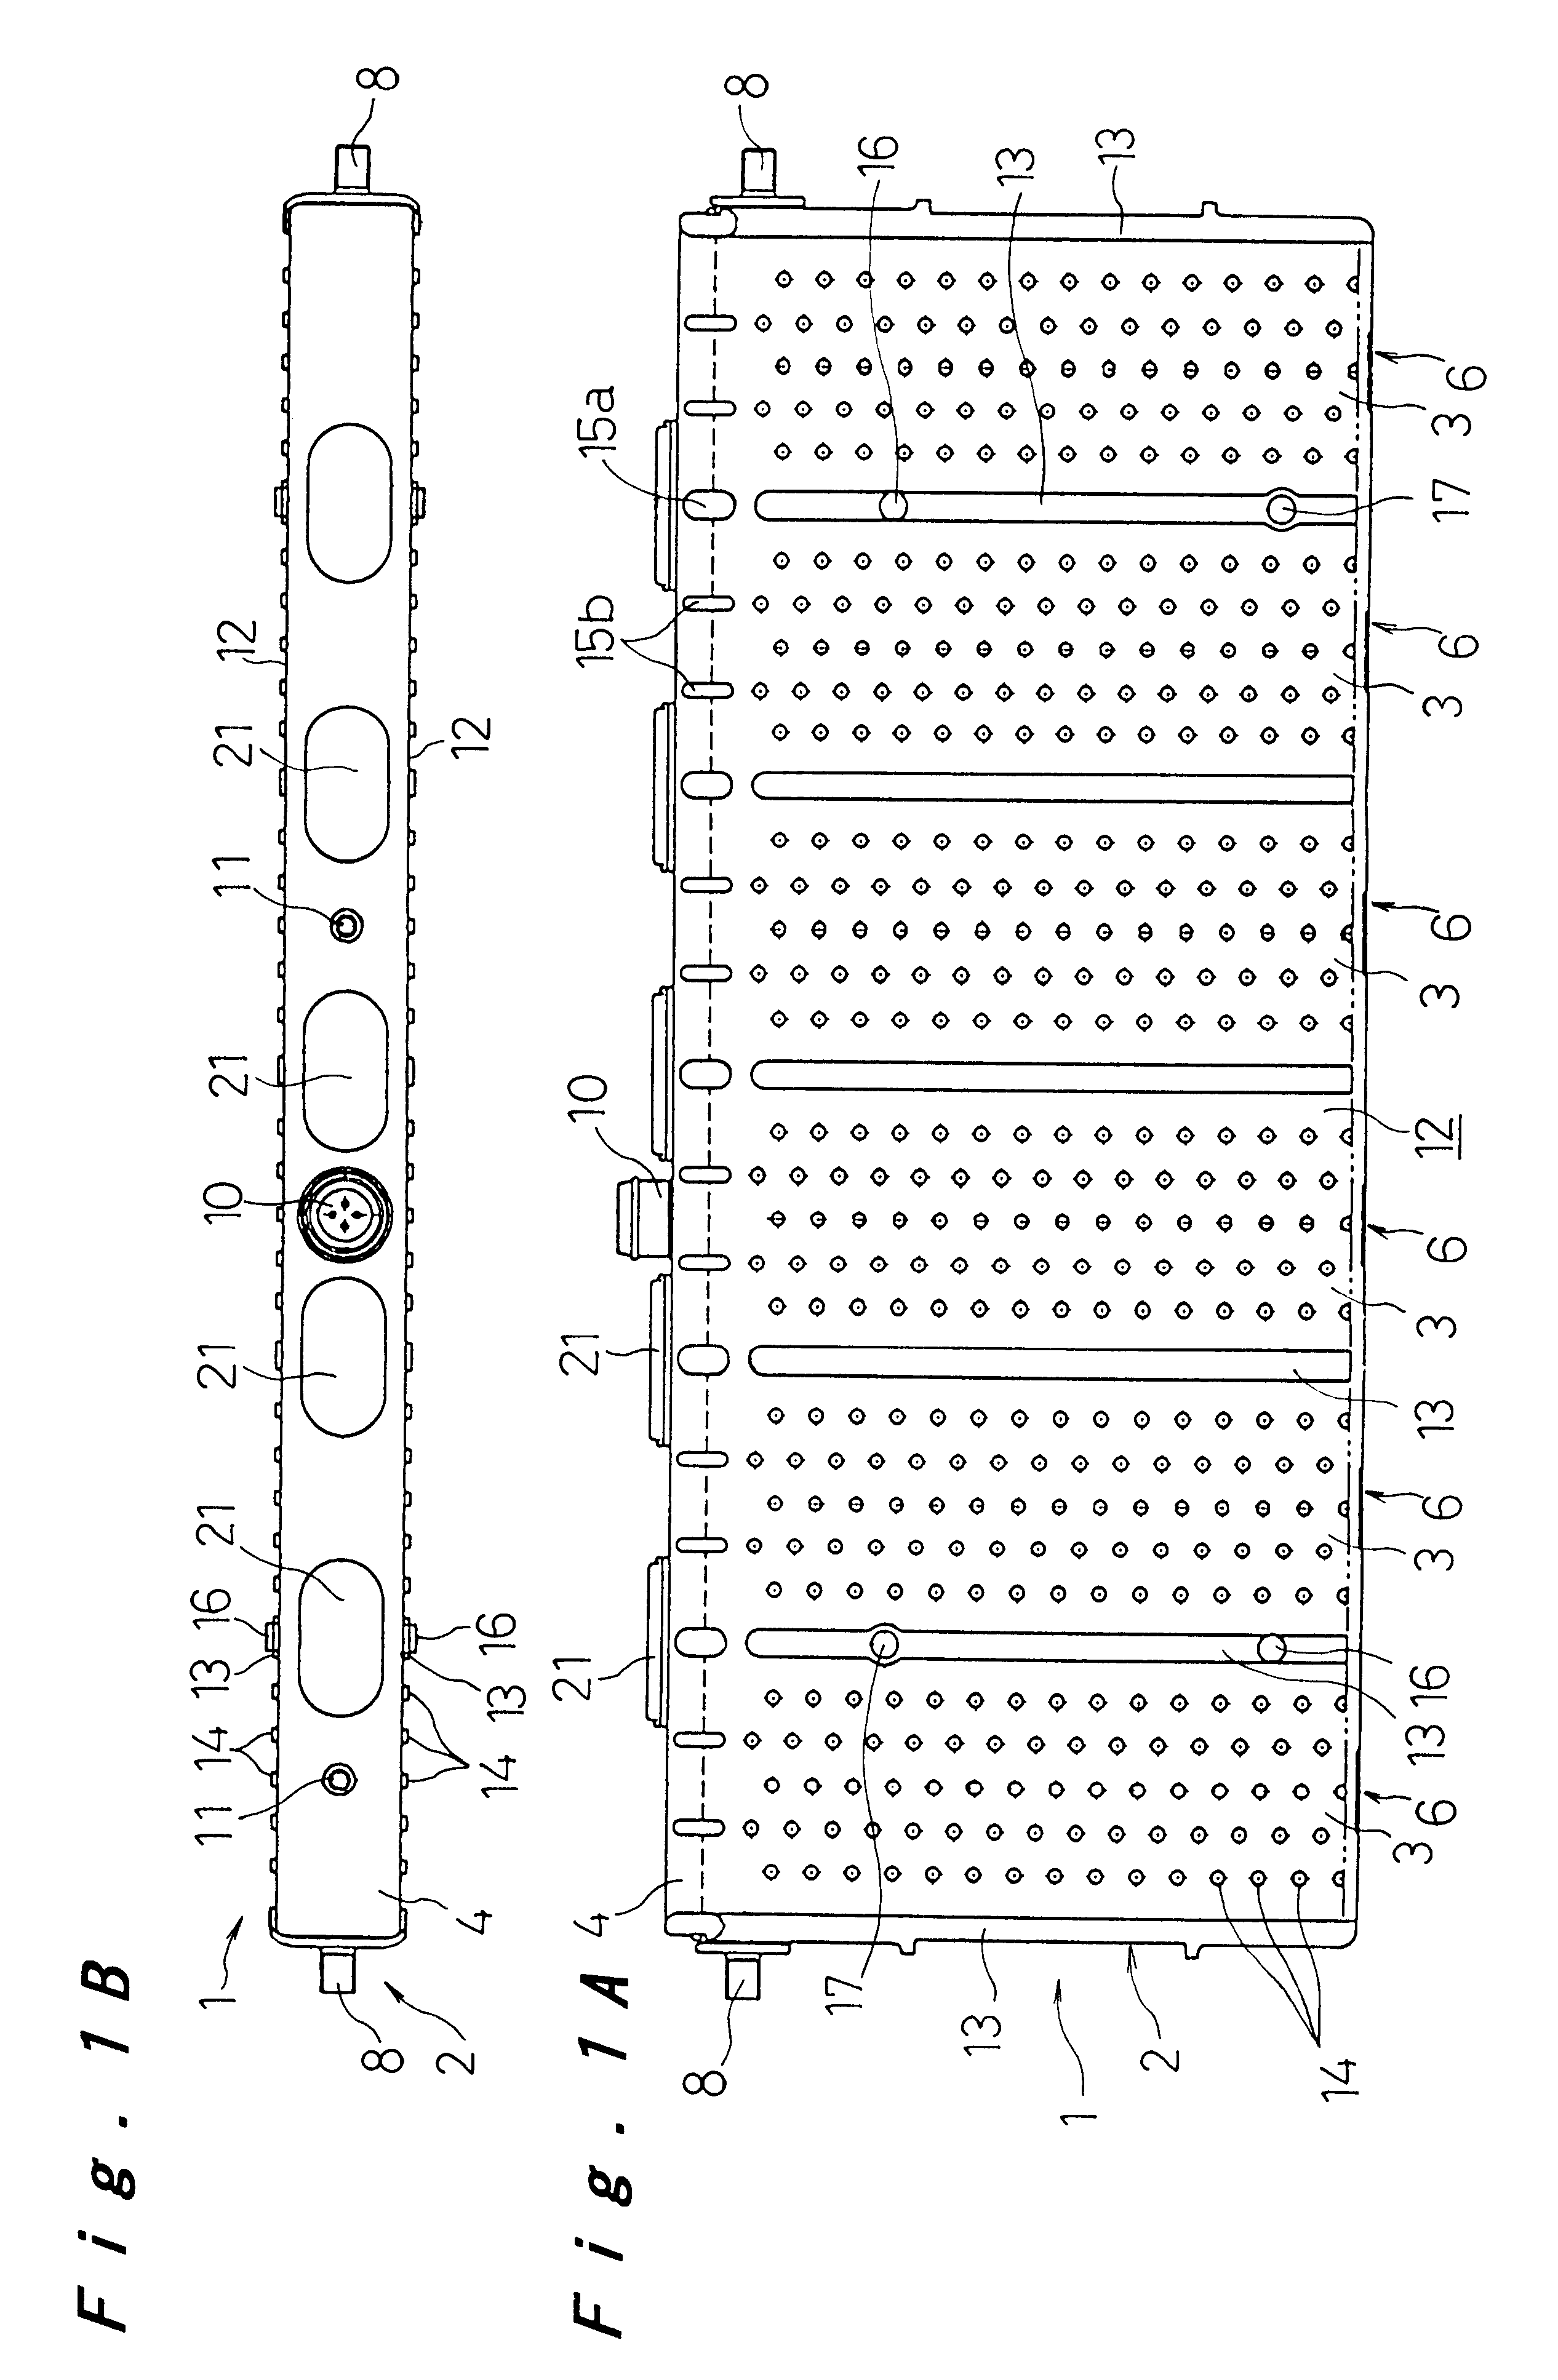 Battery module, and connecting structure of cells in the battery module